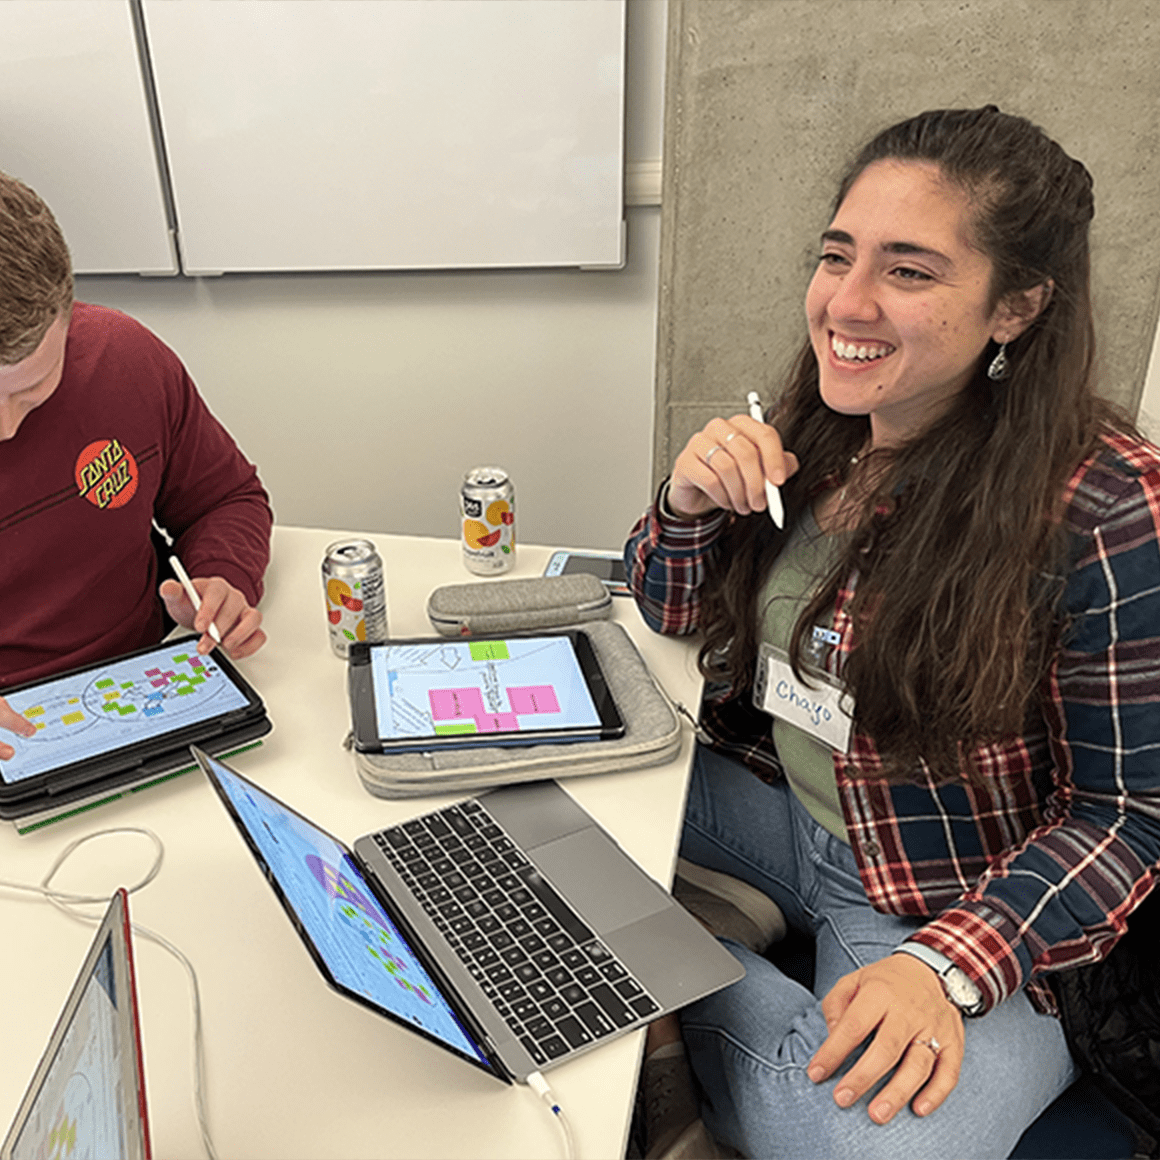 Two graduate students engaged in active learning. Students are smiling. There are computers and cans on the table.